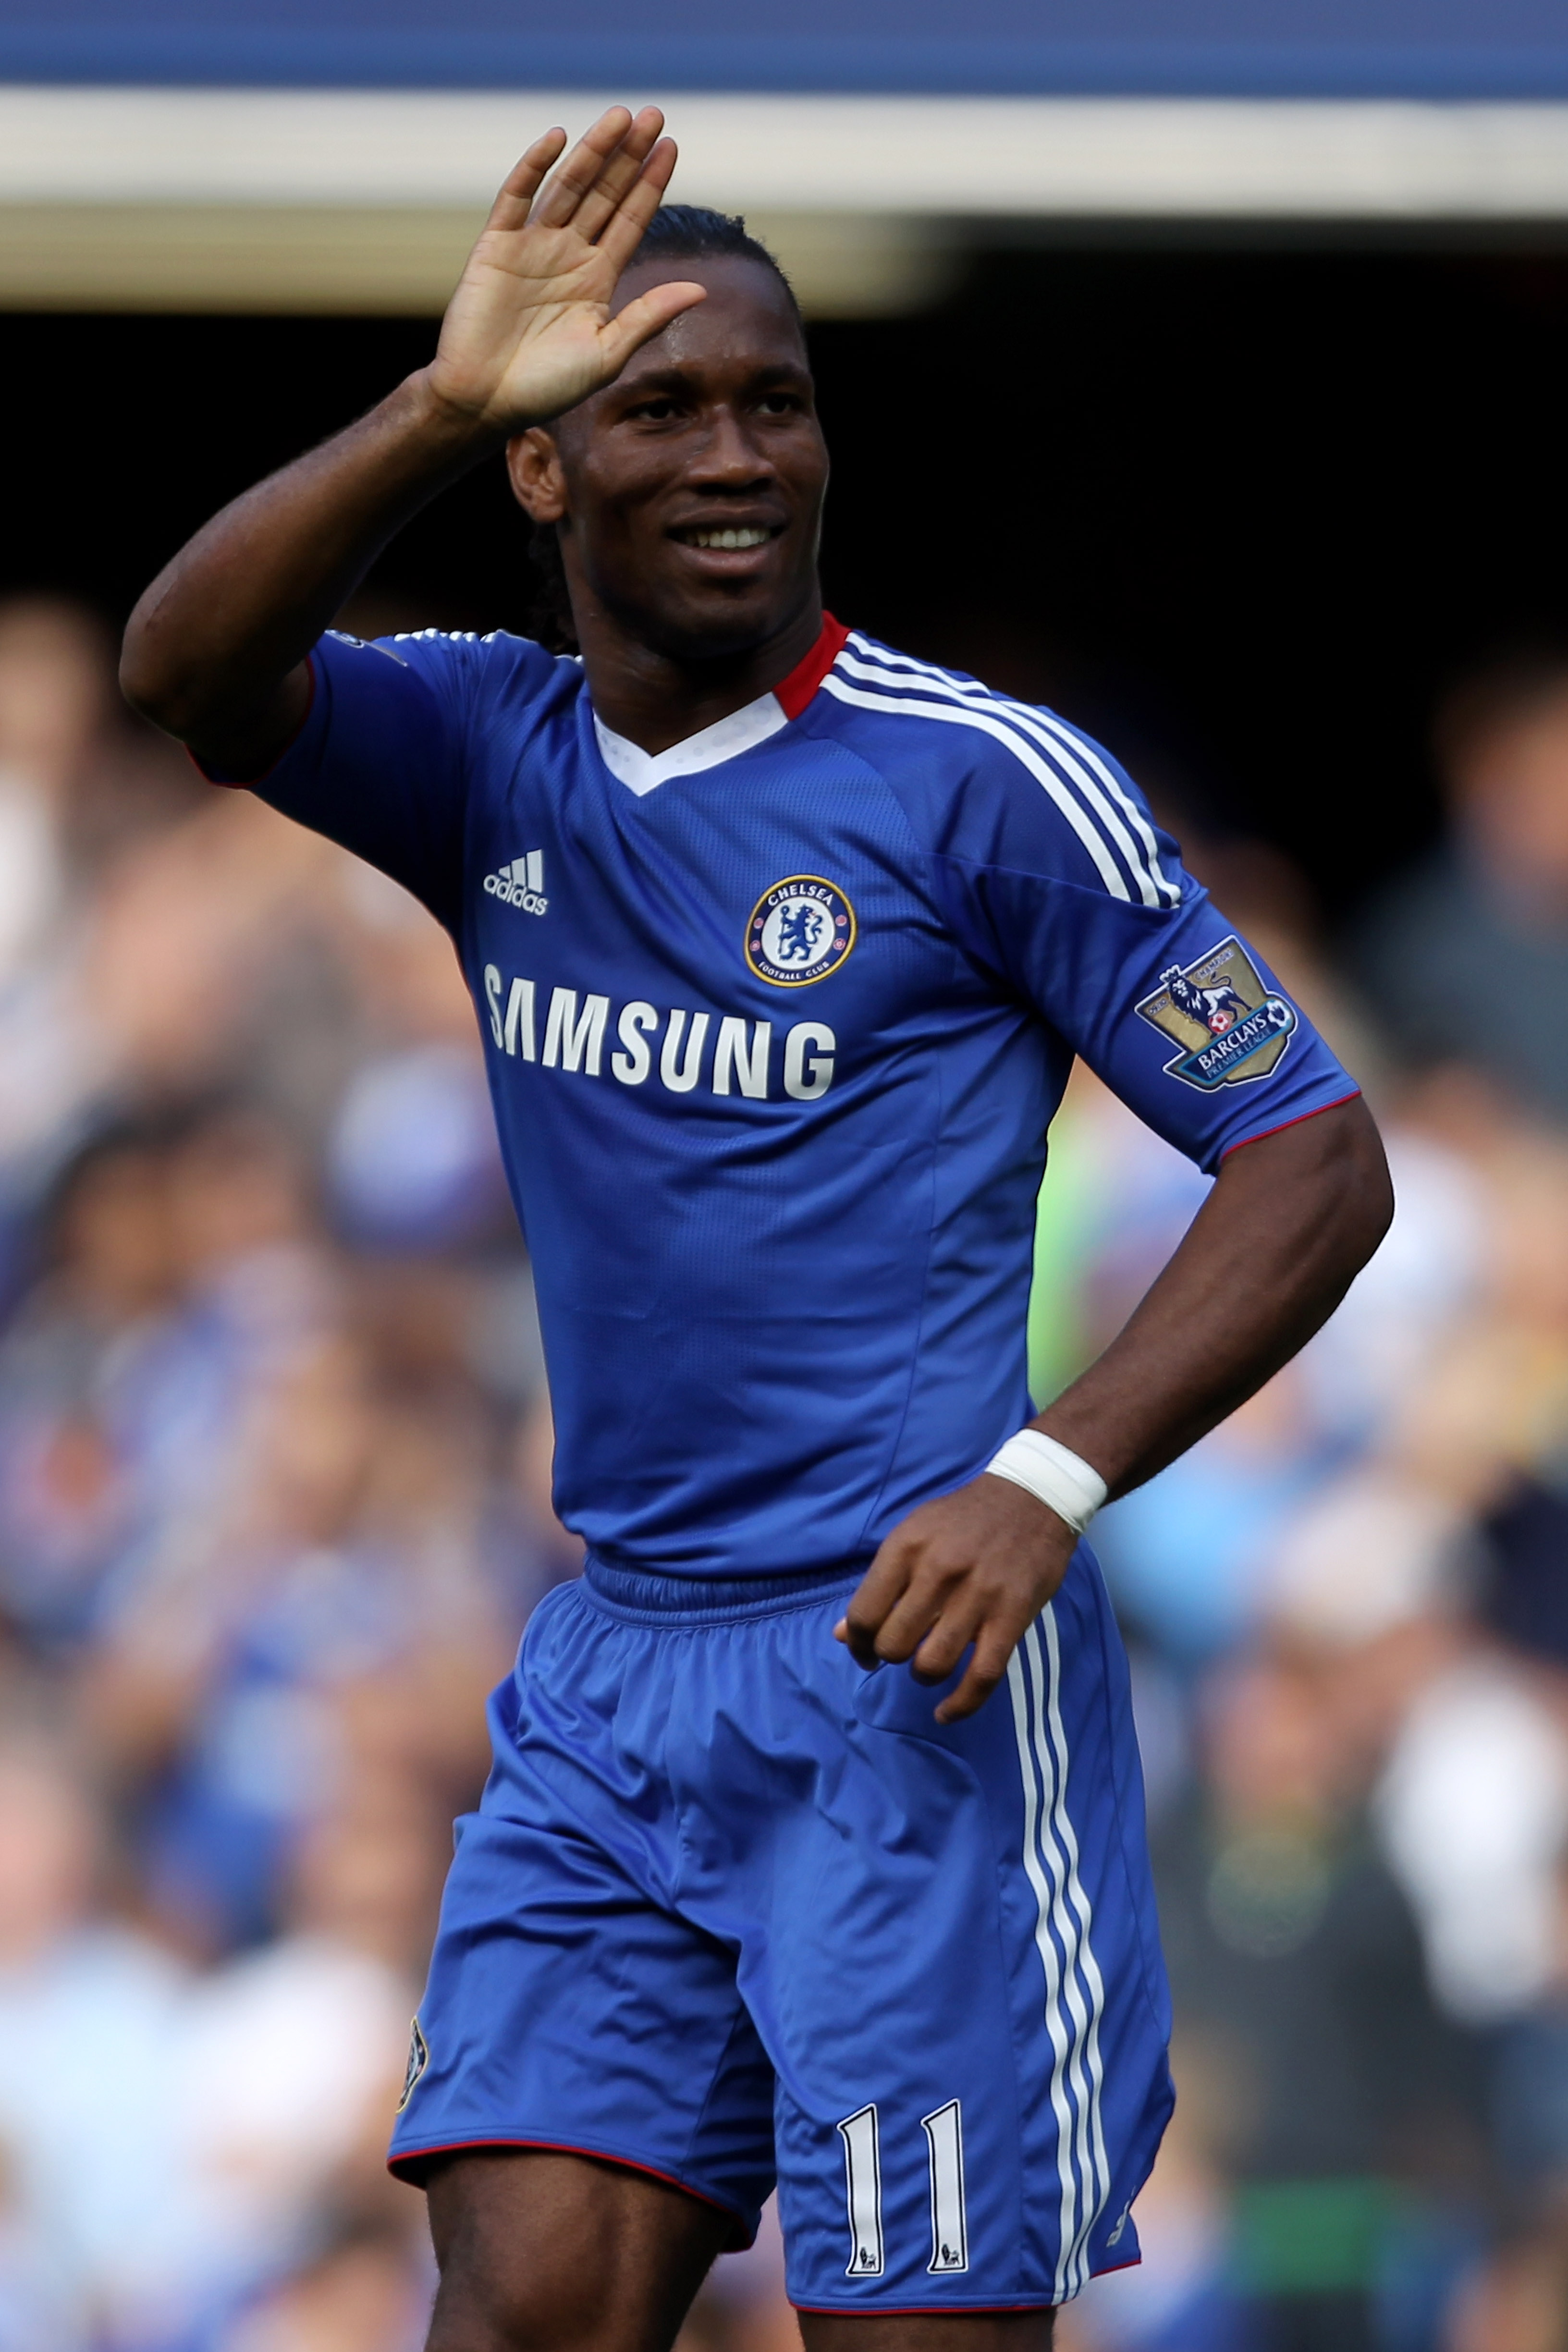 LONDON, ENGLAND - AUGUST 28:  Didier Drogba of Chelsea celebrates after scoring his team's second goal from the penalty spot during the Barclays Premier League match between Chelsea and Stoke City at Stamford Bridge on August 28, 2010 in London, England.